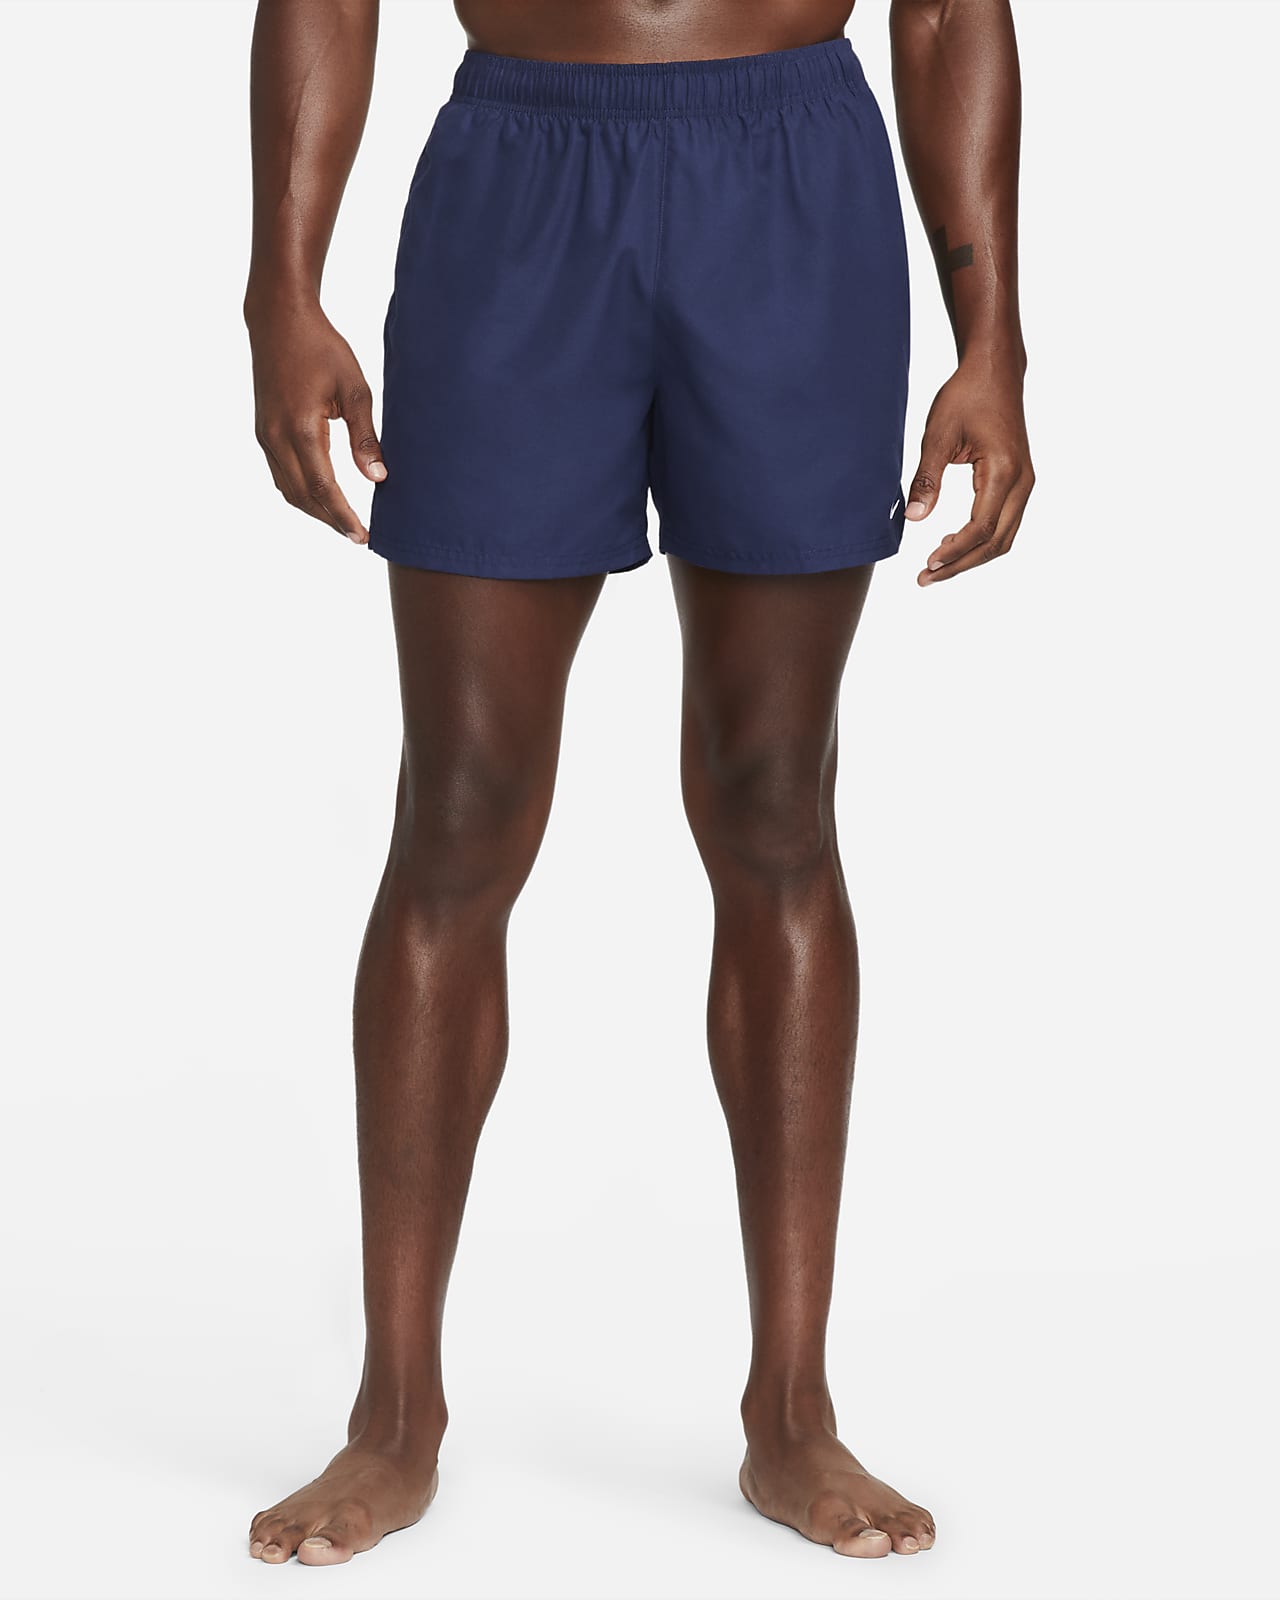 Nike Essential Men's 13cm (approx.) Lap Volley Swimming Shorts